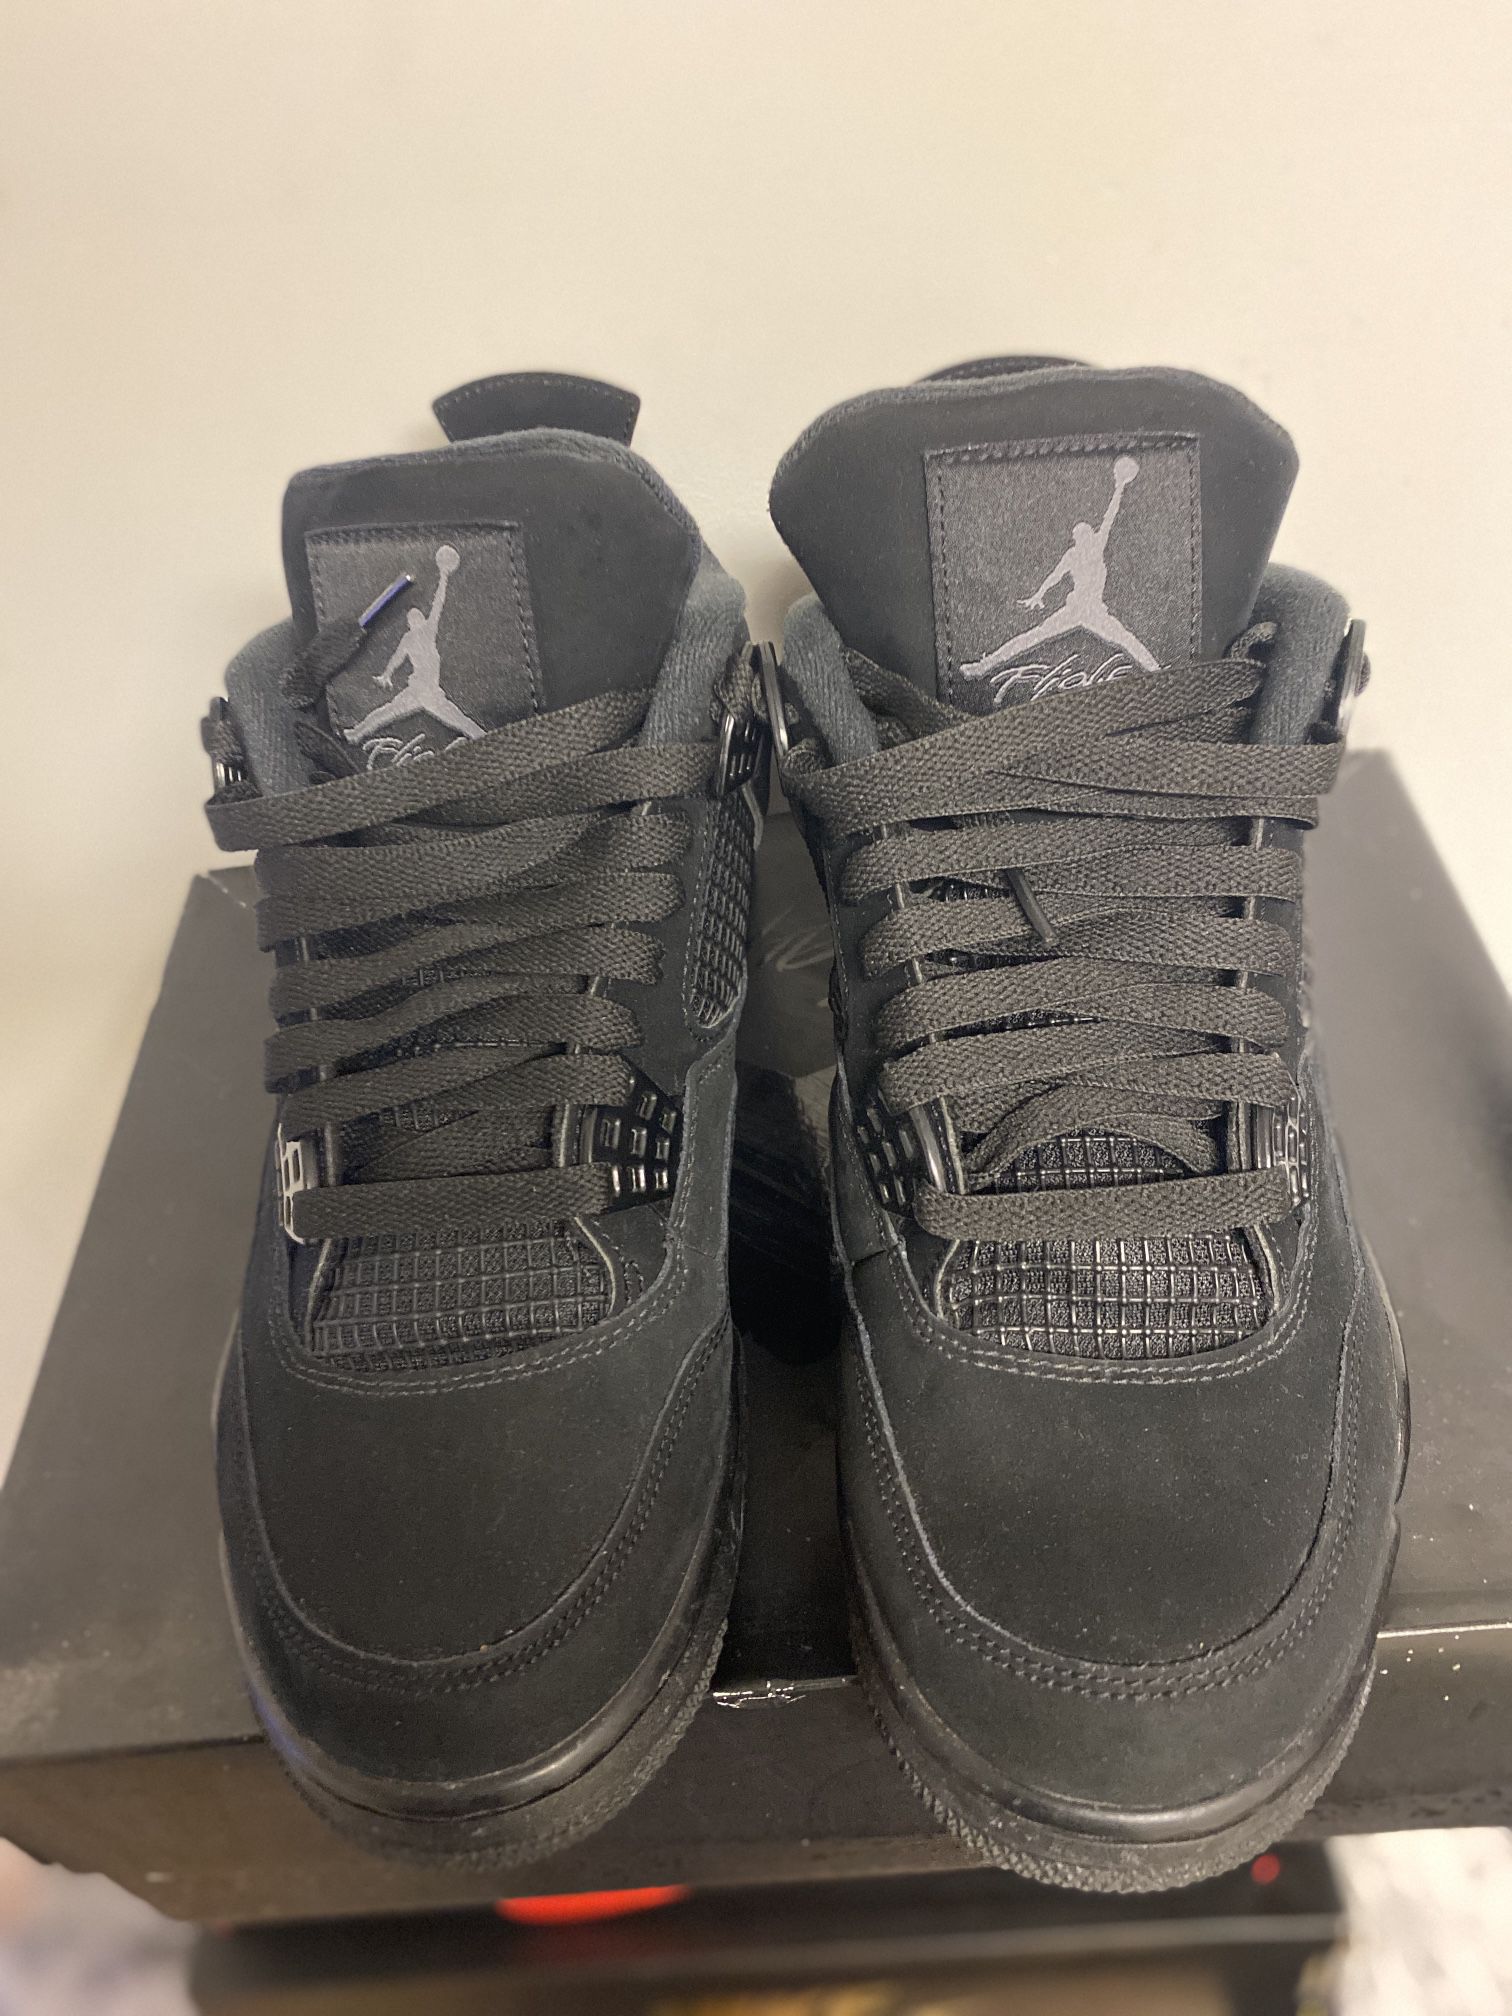 Jordan 4 Retro Black Cat All Sizes Available for Sale in Queens, NY -  OfferUp